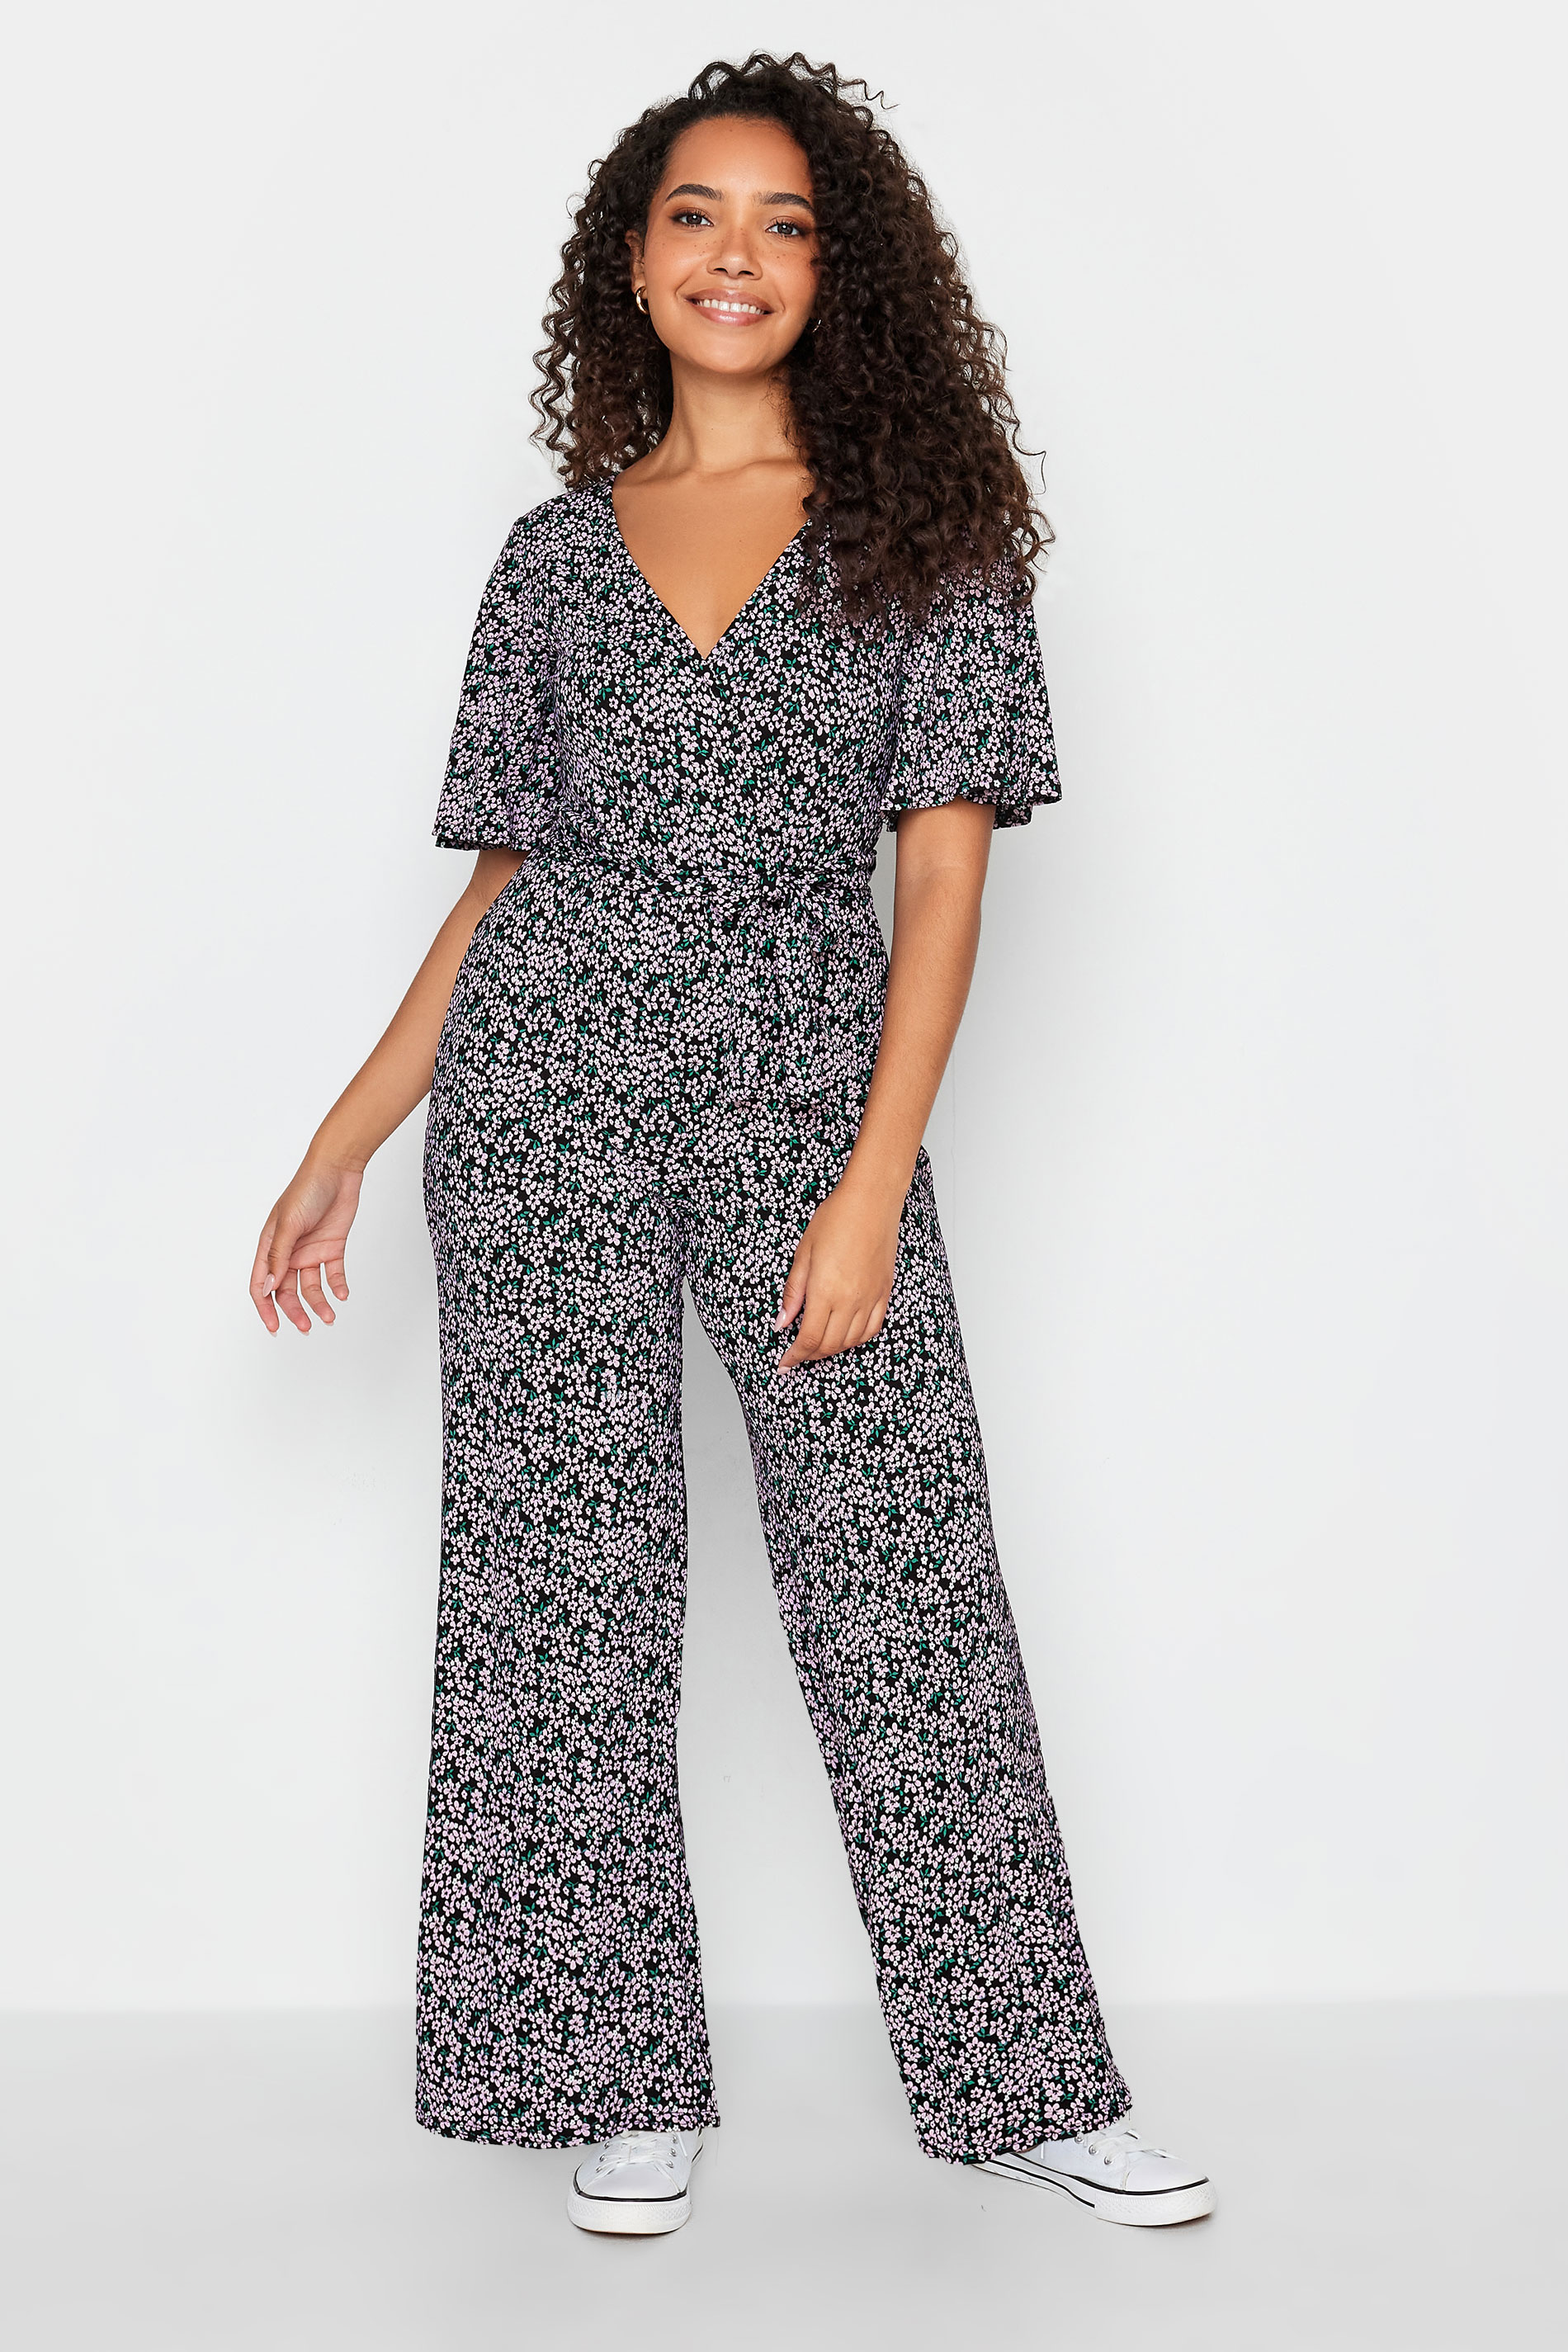 Aggregate more than 190 ditsy floral jumpsuit latest